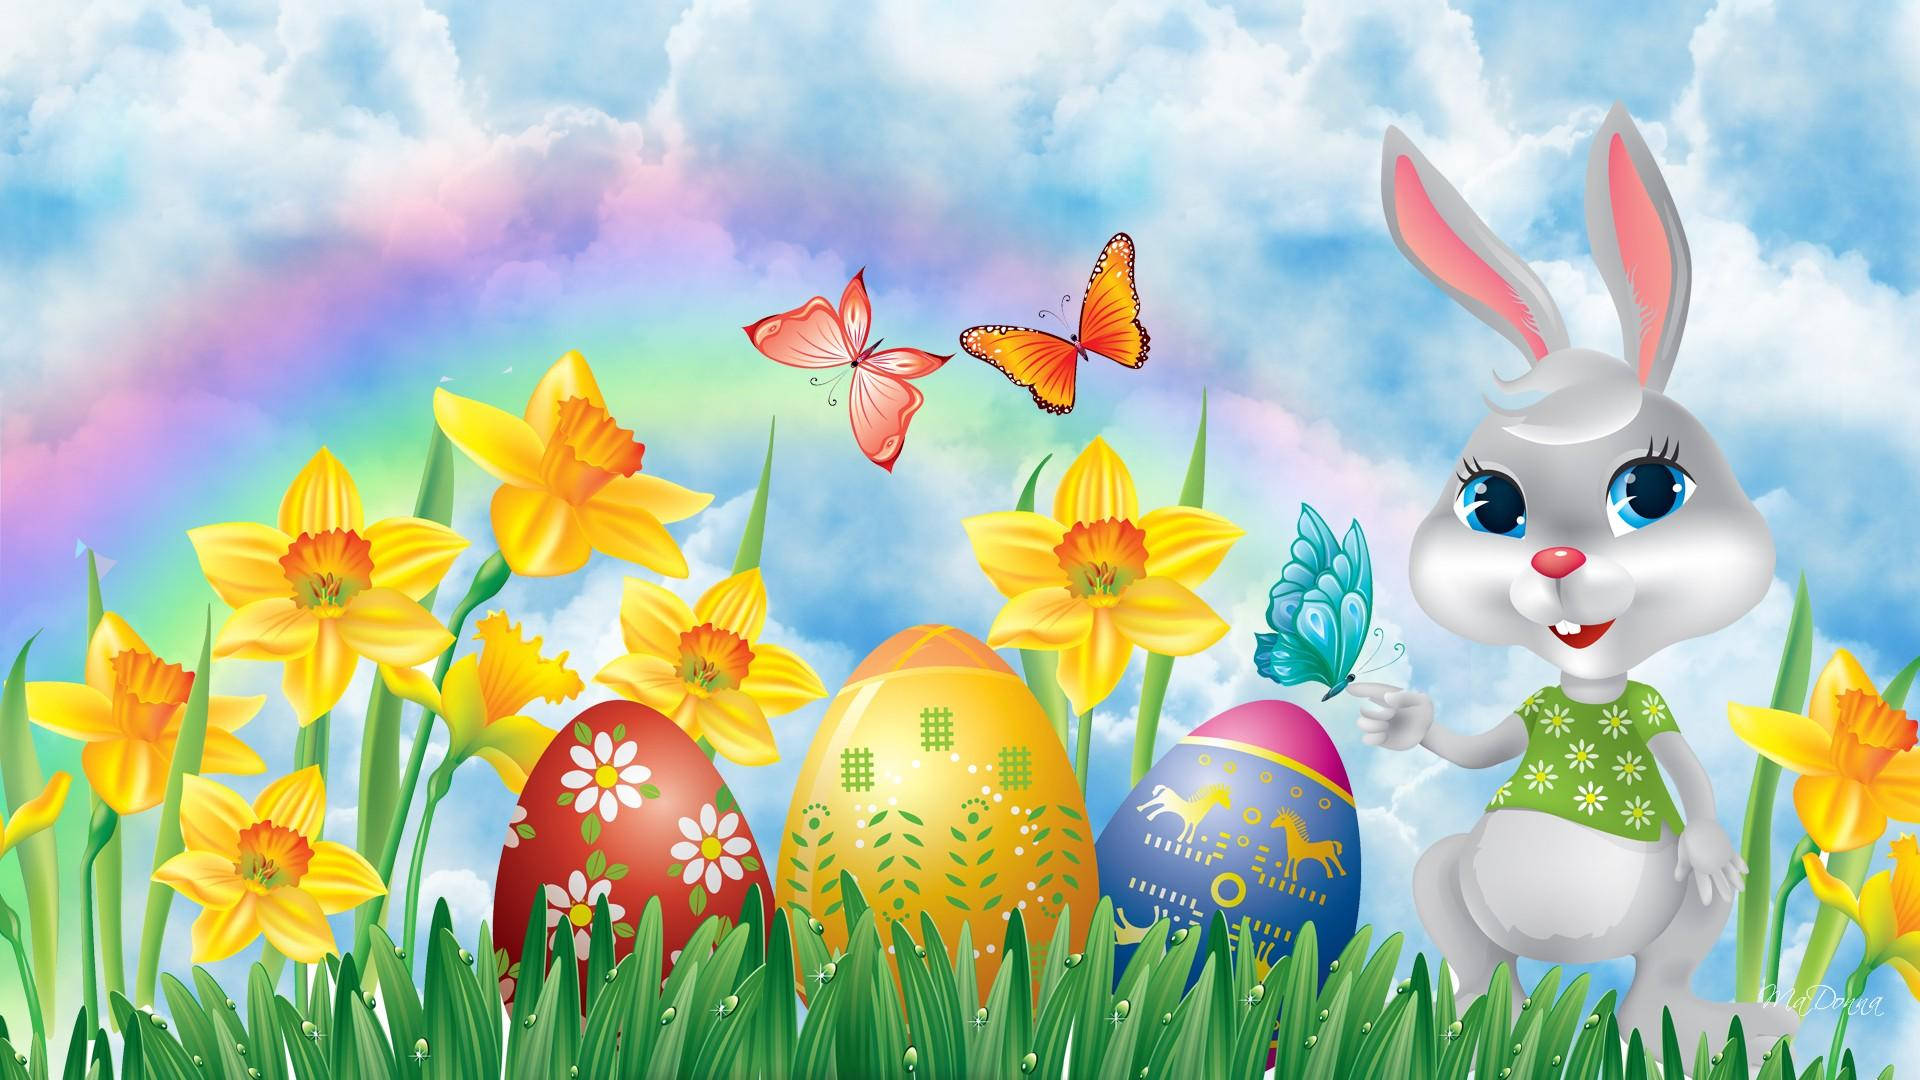 "Celebrate Easter with Bunny and Eggs!" Wallpaper